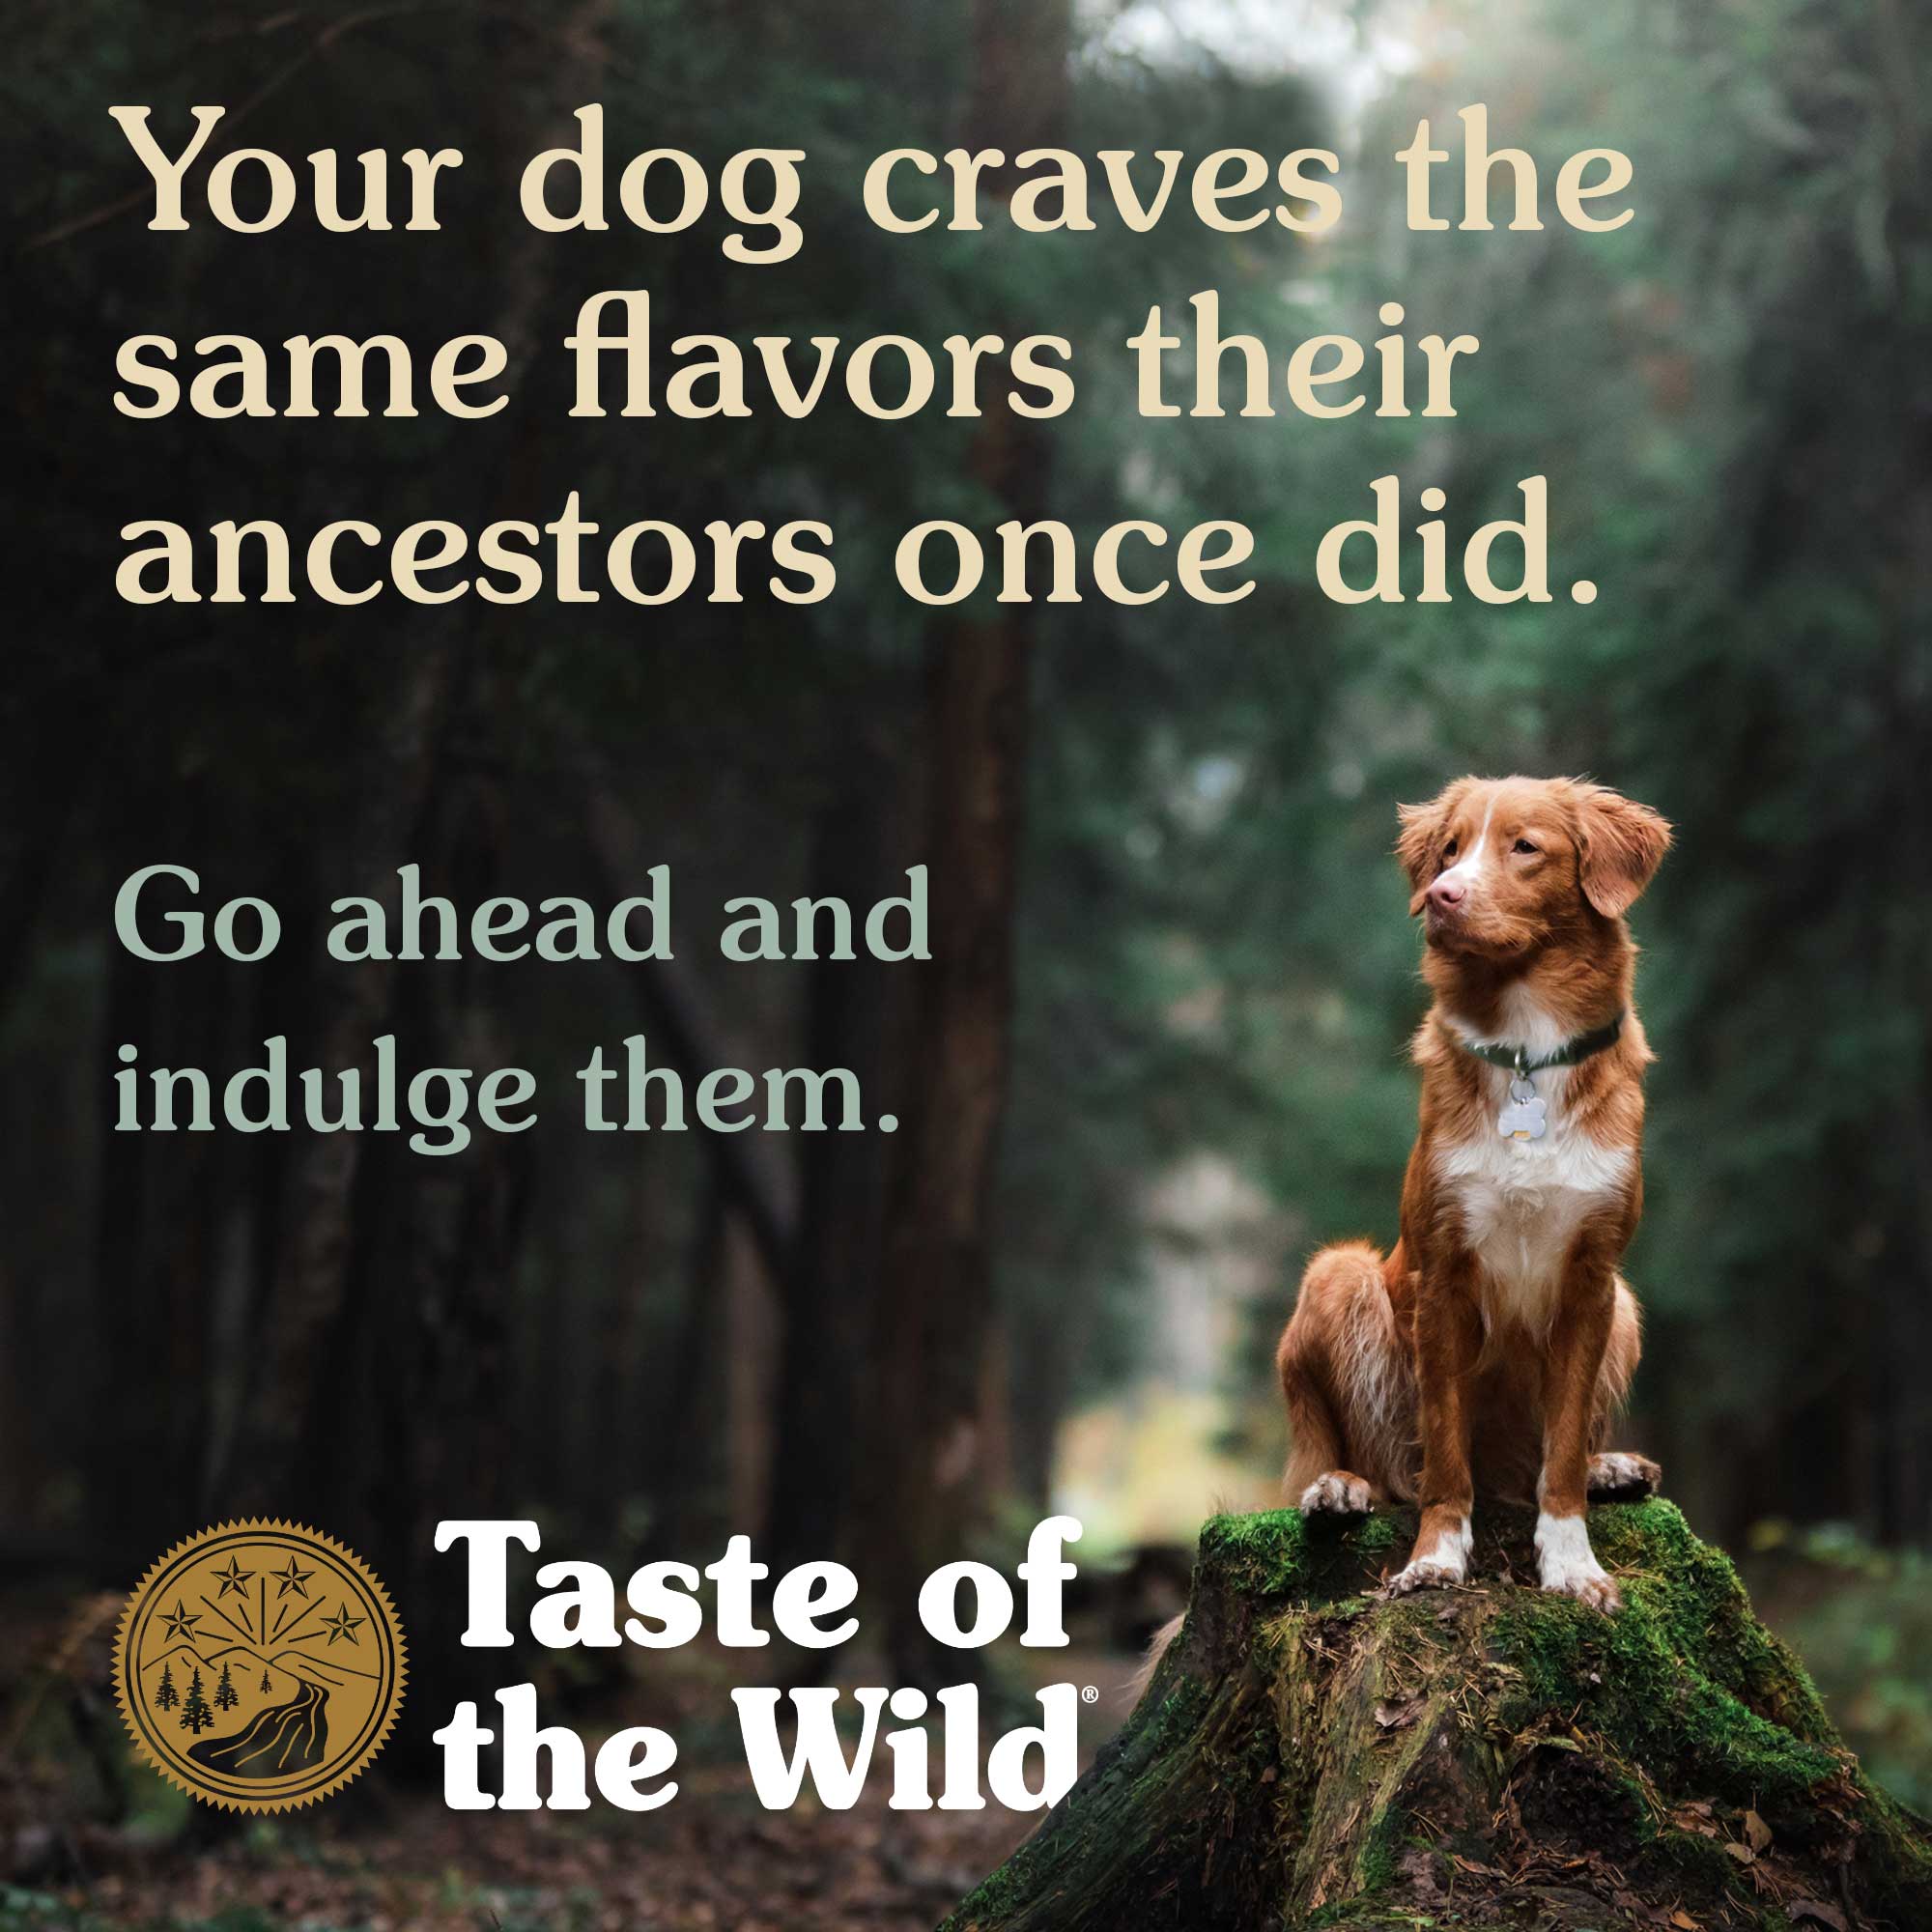 Your dog craves the same flavors their ancestors once did | Taste of the Wild